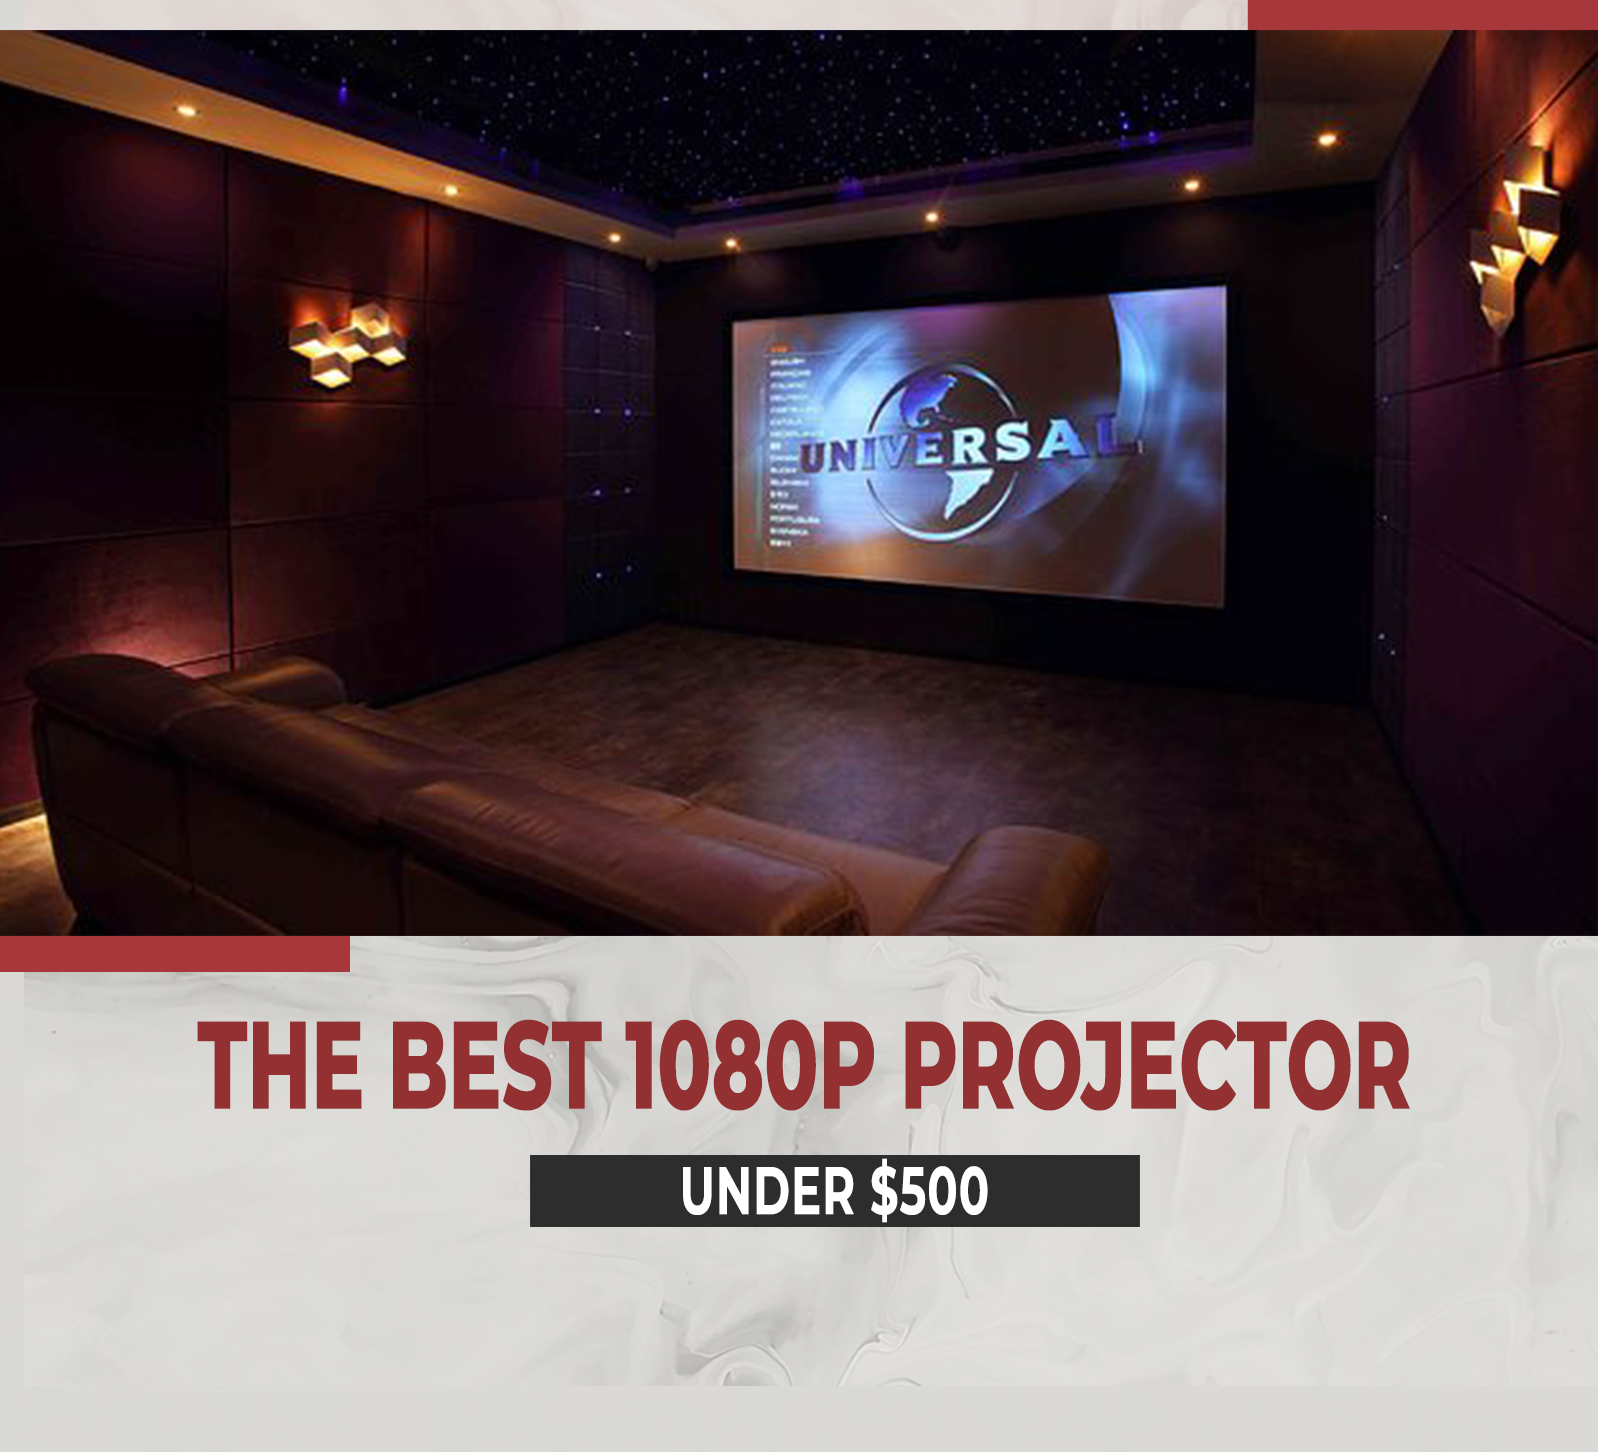 THE BEST 1080P PROJECTOR UNDER 500 FOR 2021